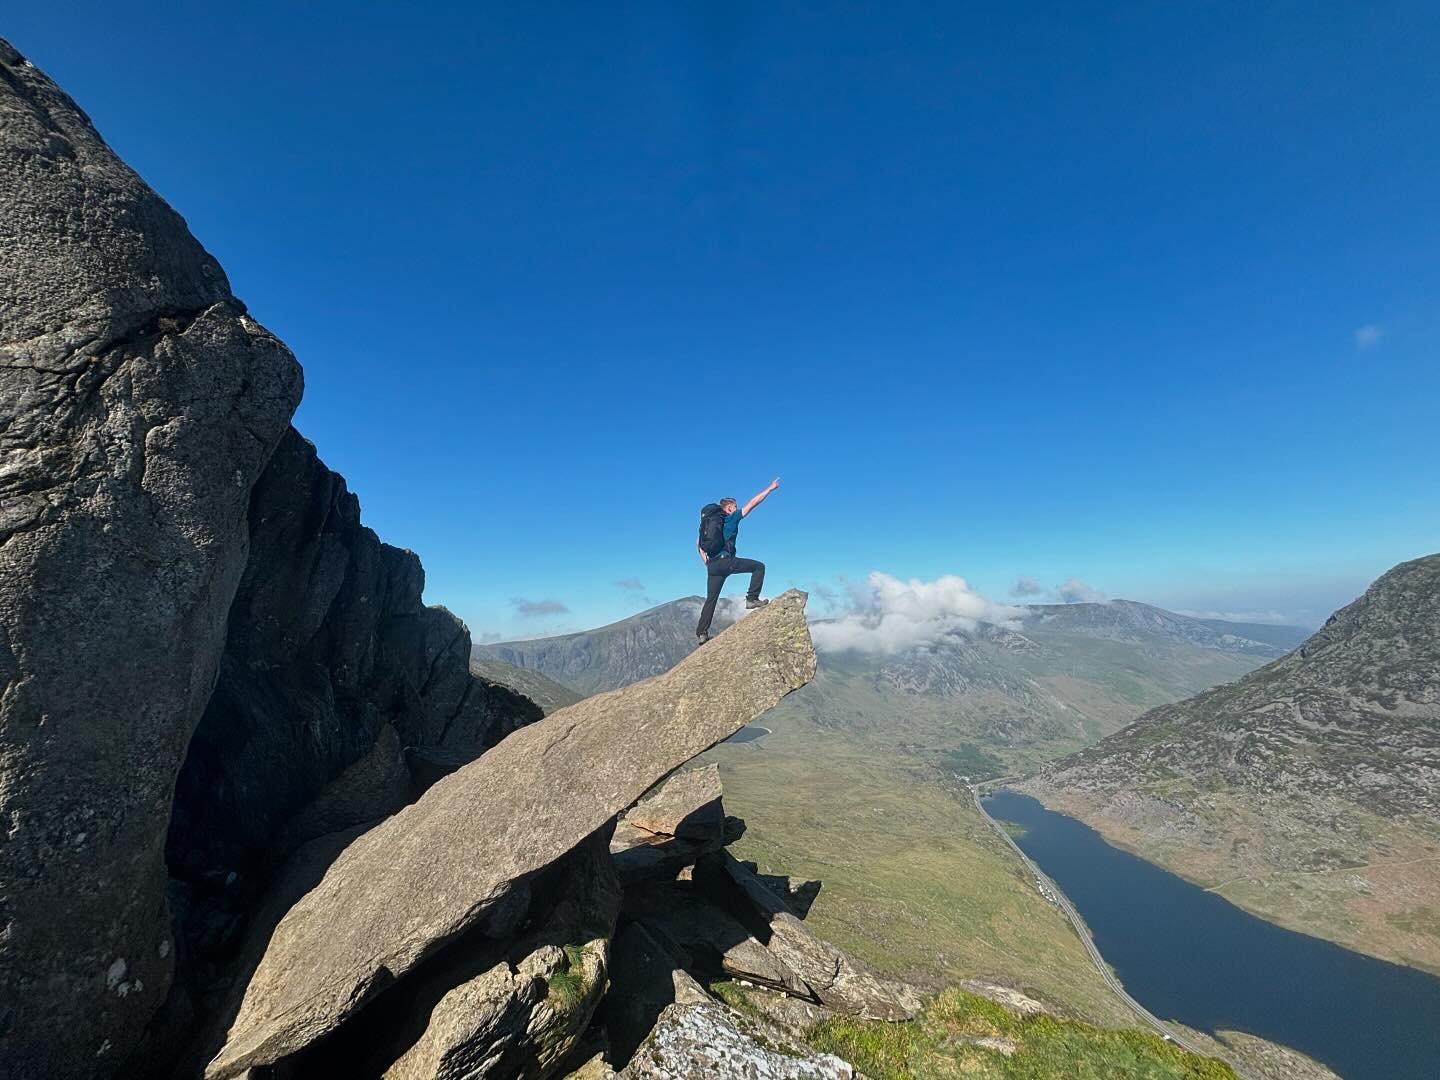 The North Ridge of Tryfan. Always a quality mountain day. 

#tryfan #ogwen #snowdonia_scrambles #mountaineering #climbing #scrambling #buildbetterbelays #tradclimbing #learntoimb @themountaineeringcompany @v12_outdoor @ami_professionals